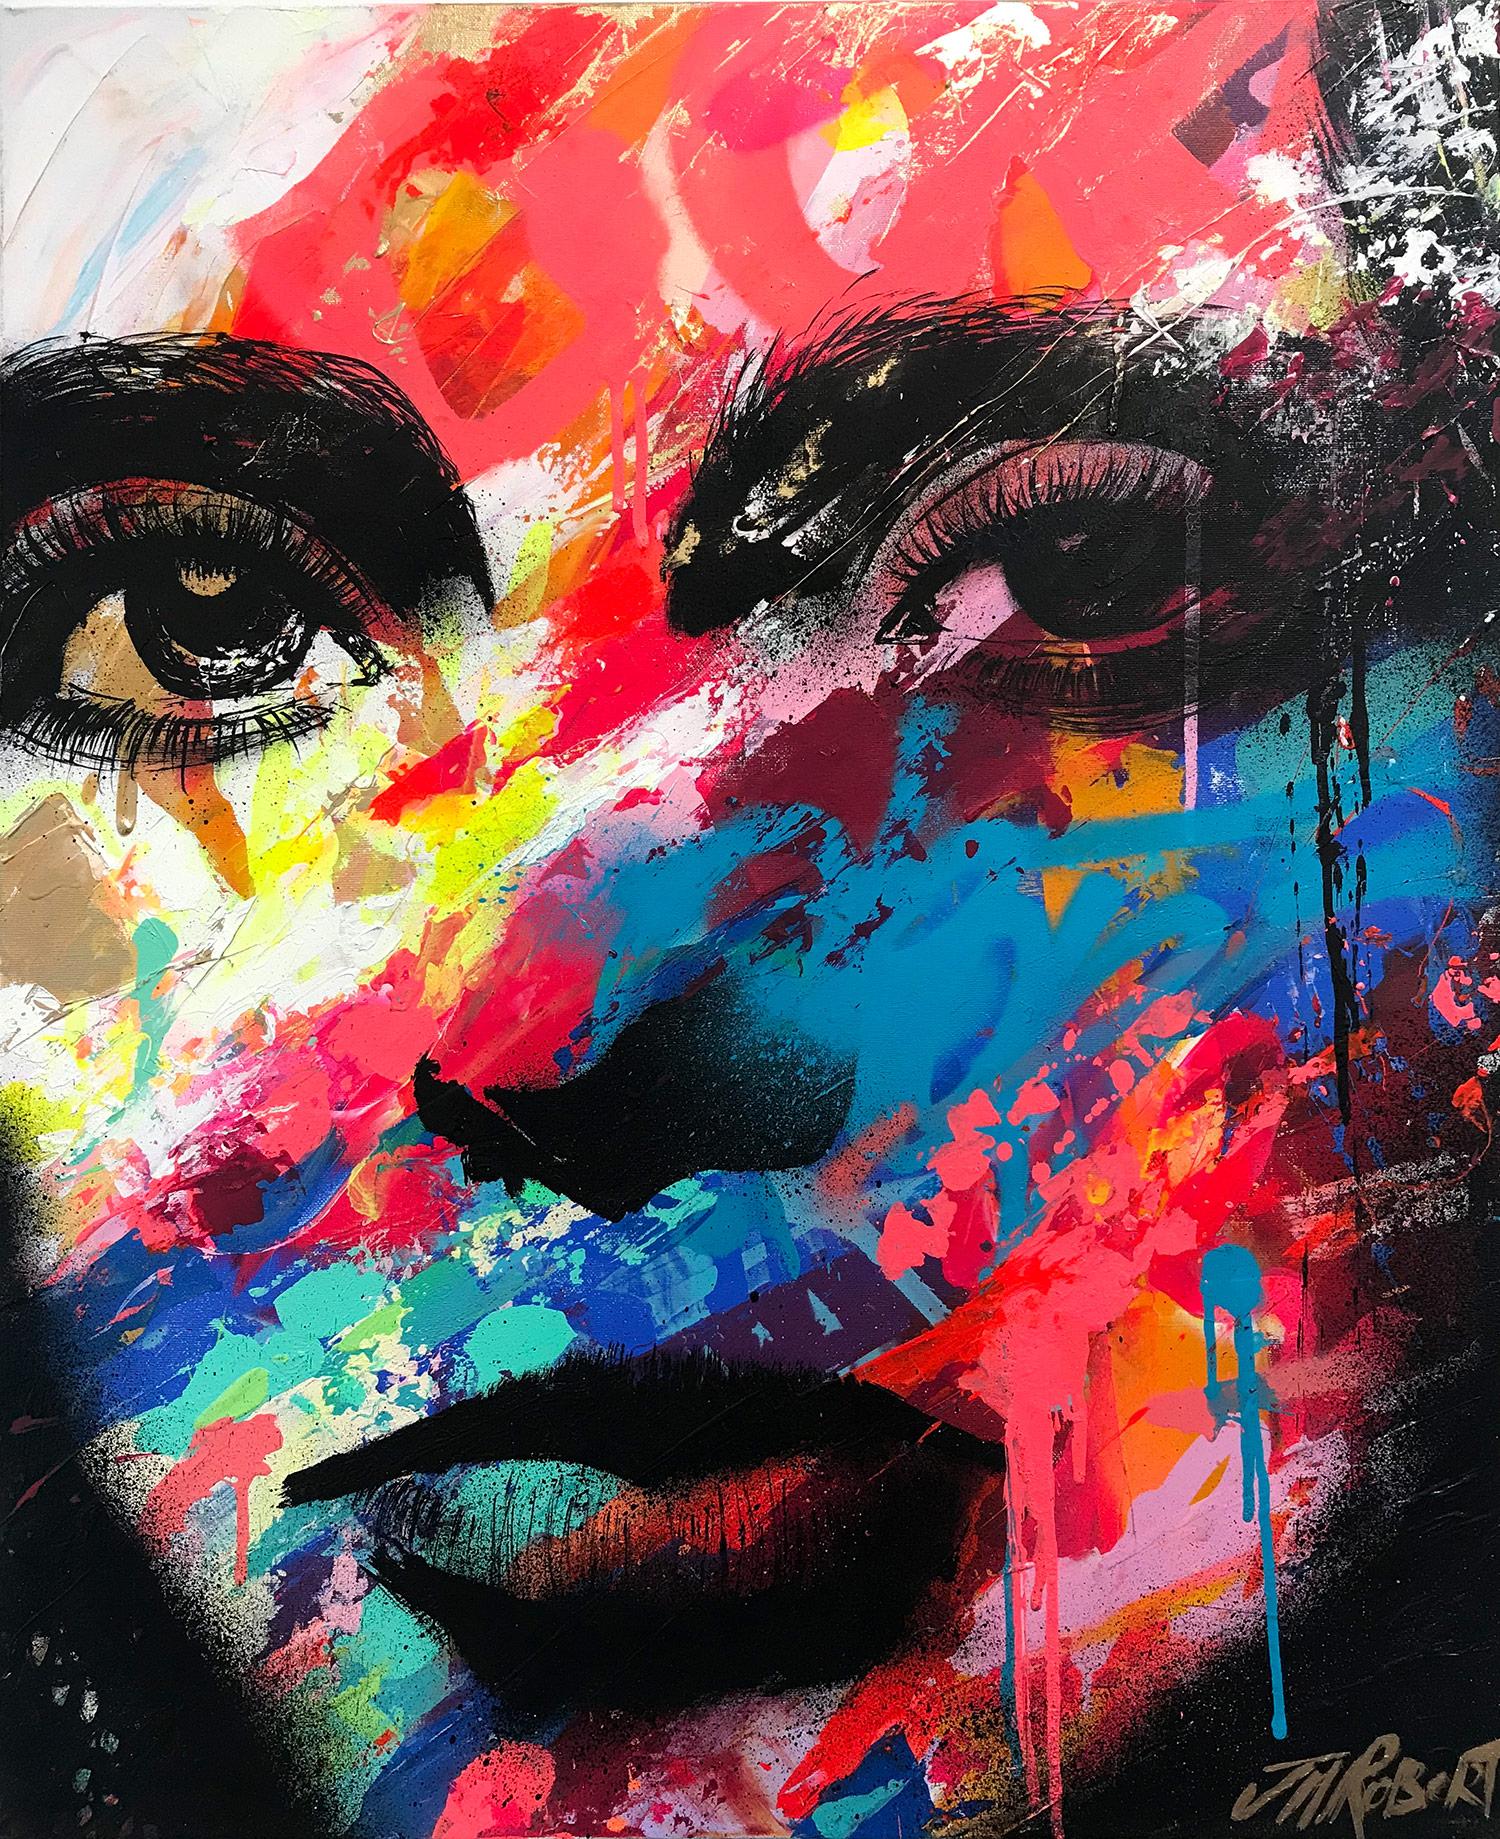 “Elle Fait Face” She Faces, Colorful, Abstract Street Art, French Artist - Painting by J.M. Robert